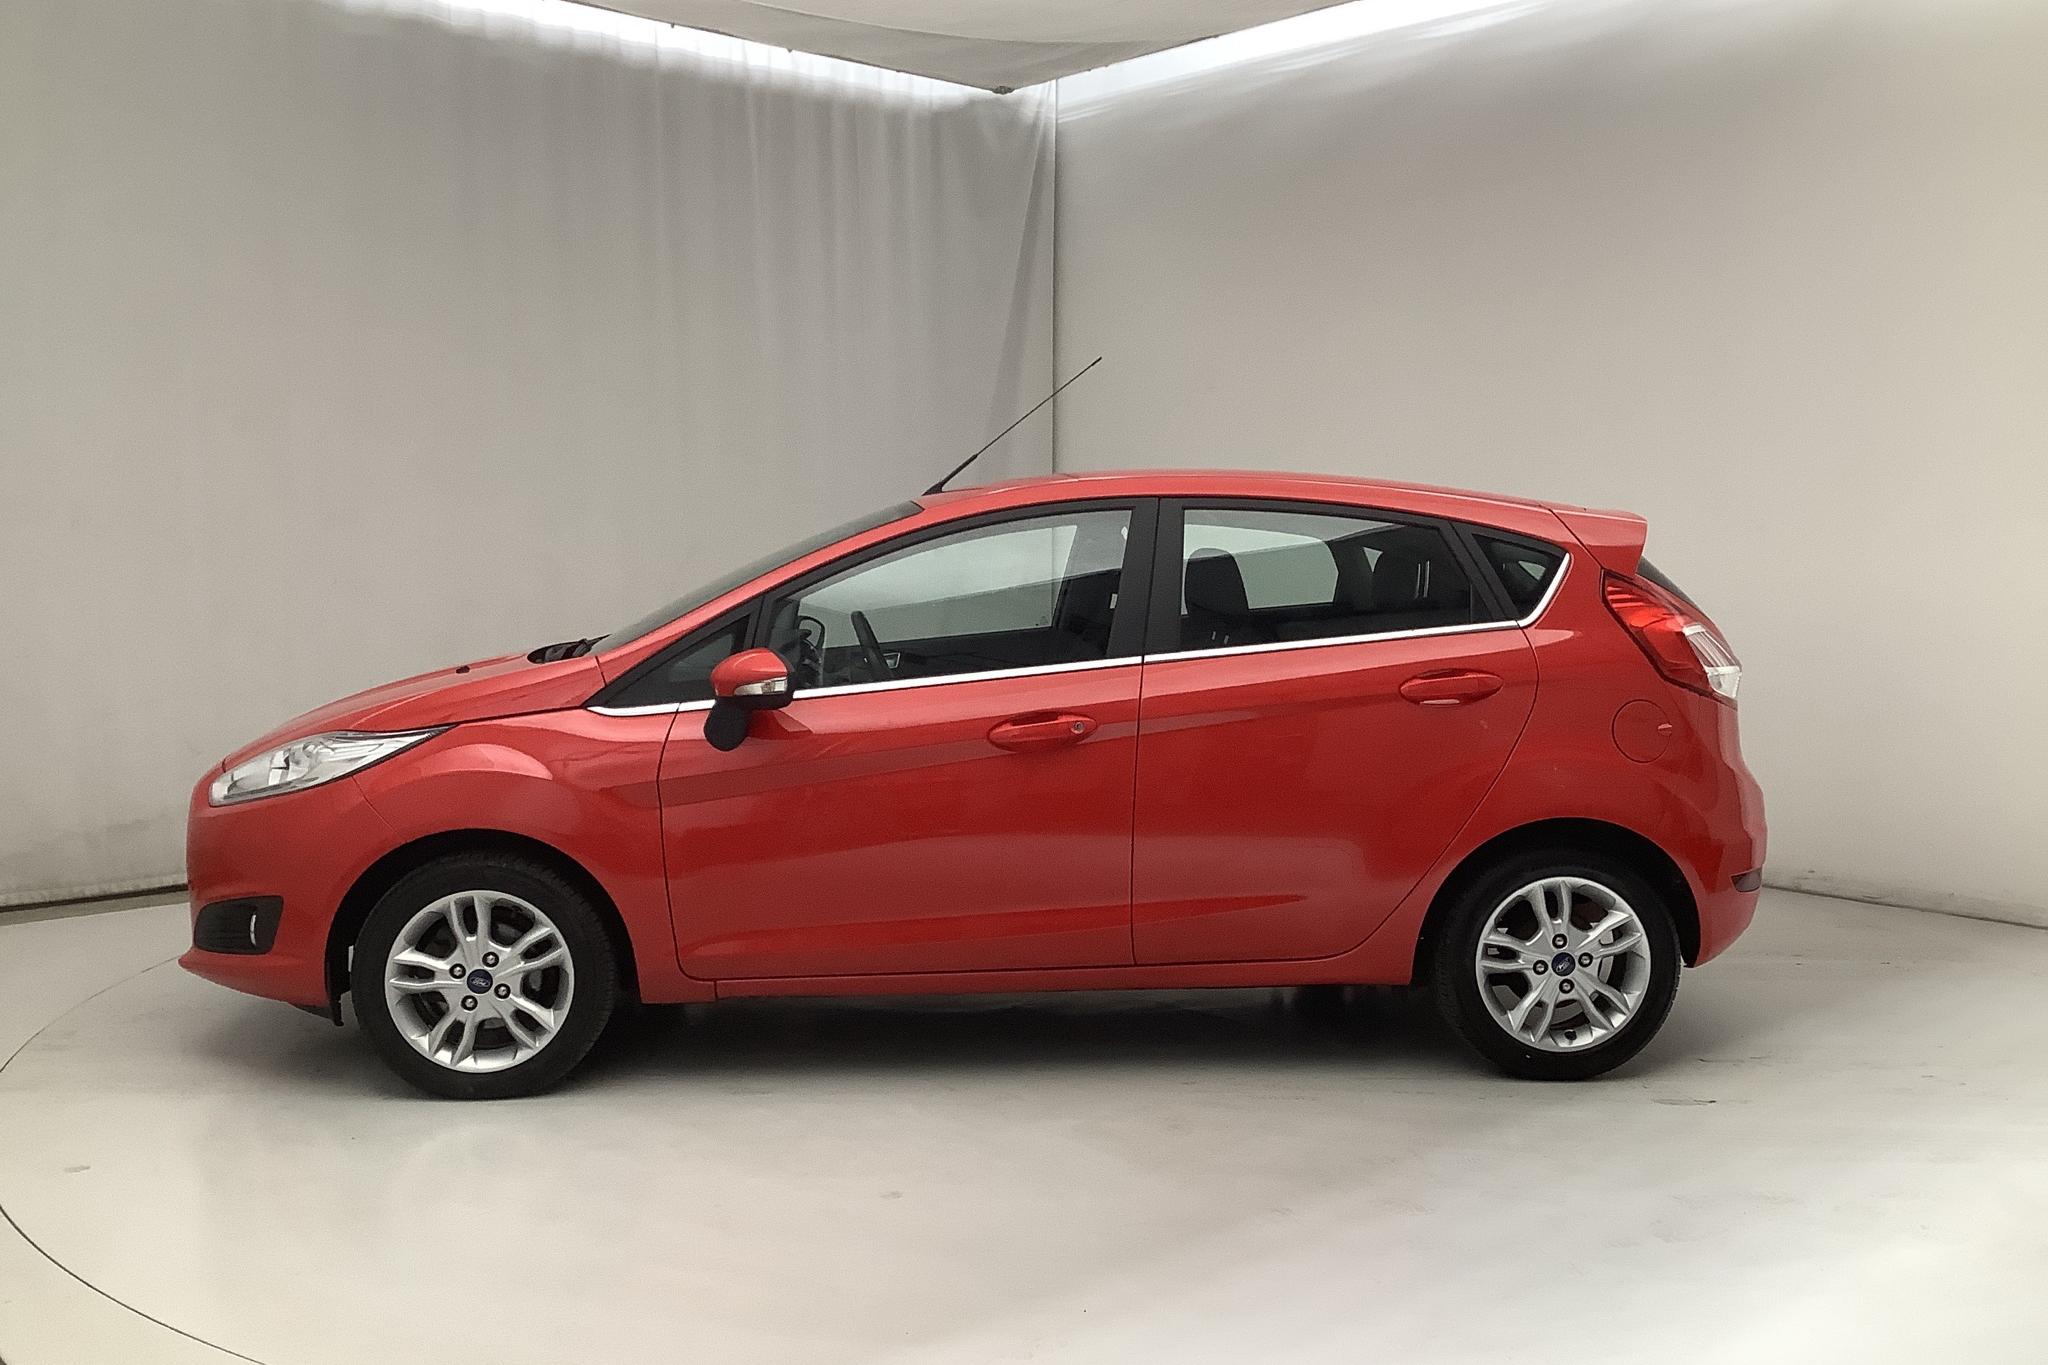 Ford Fiesta 1.0T EcoBoost 5dr (100hk) - 104 590 km - Manual - red - 2017